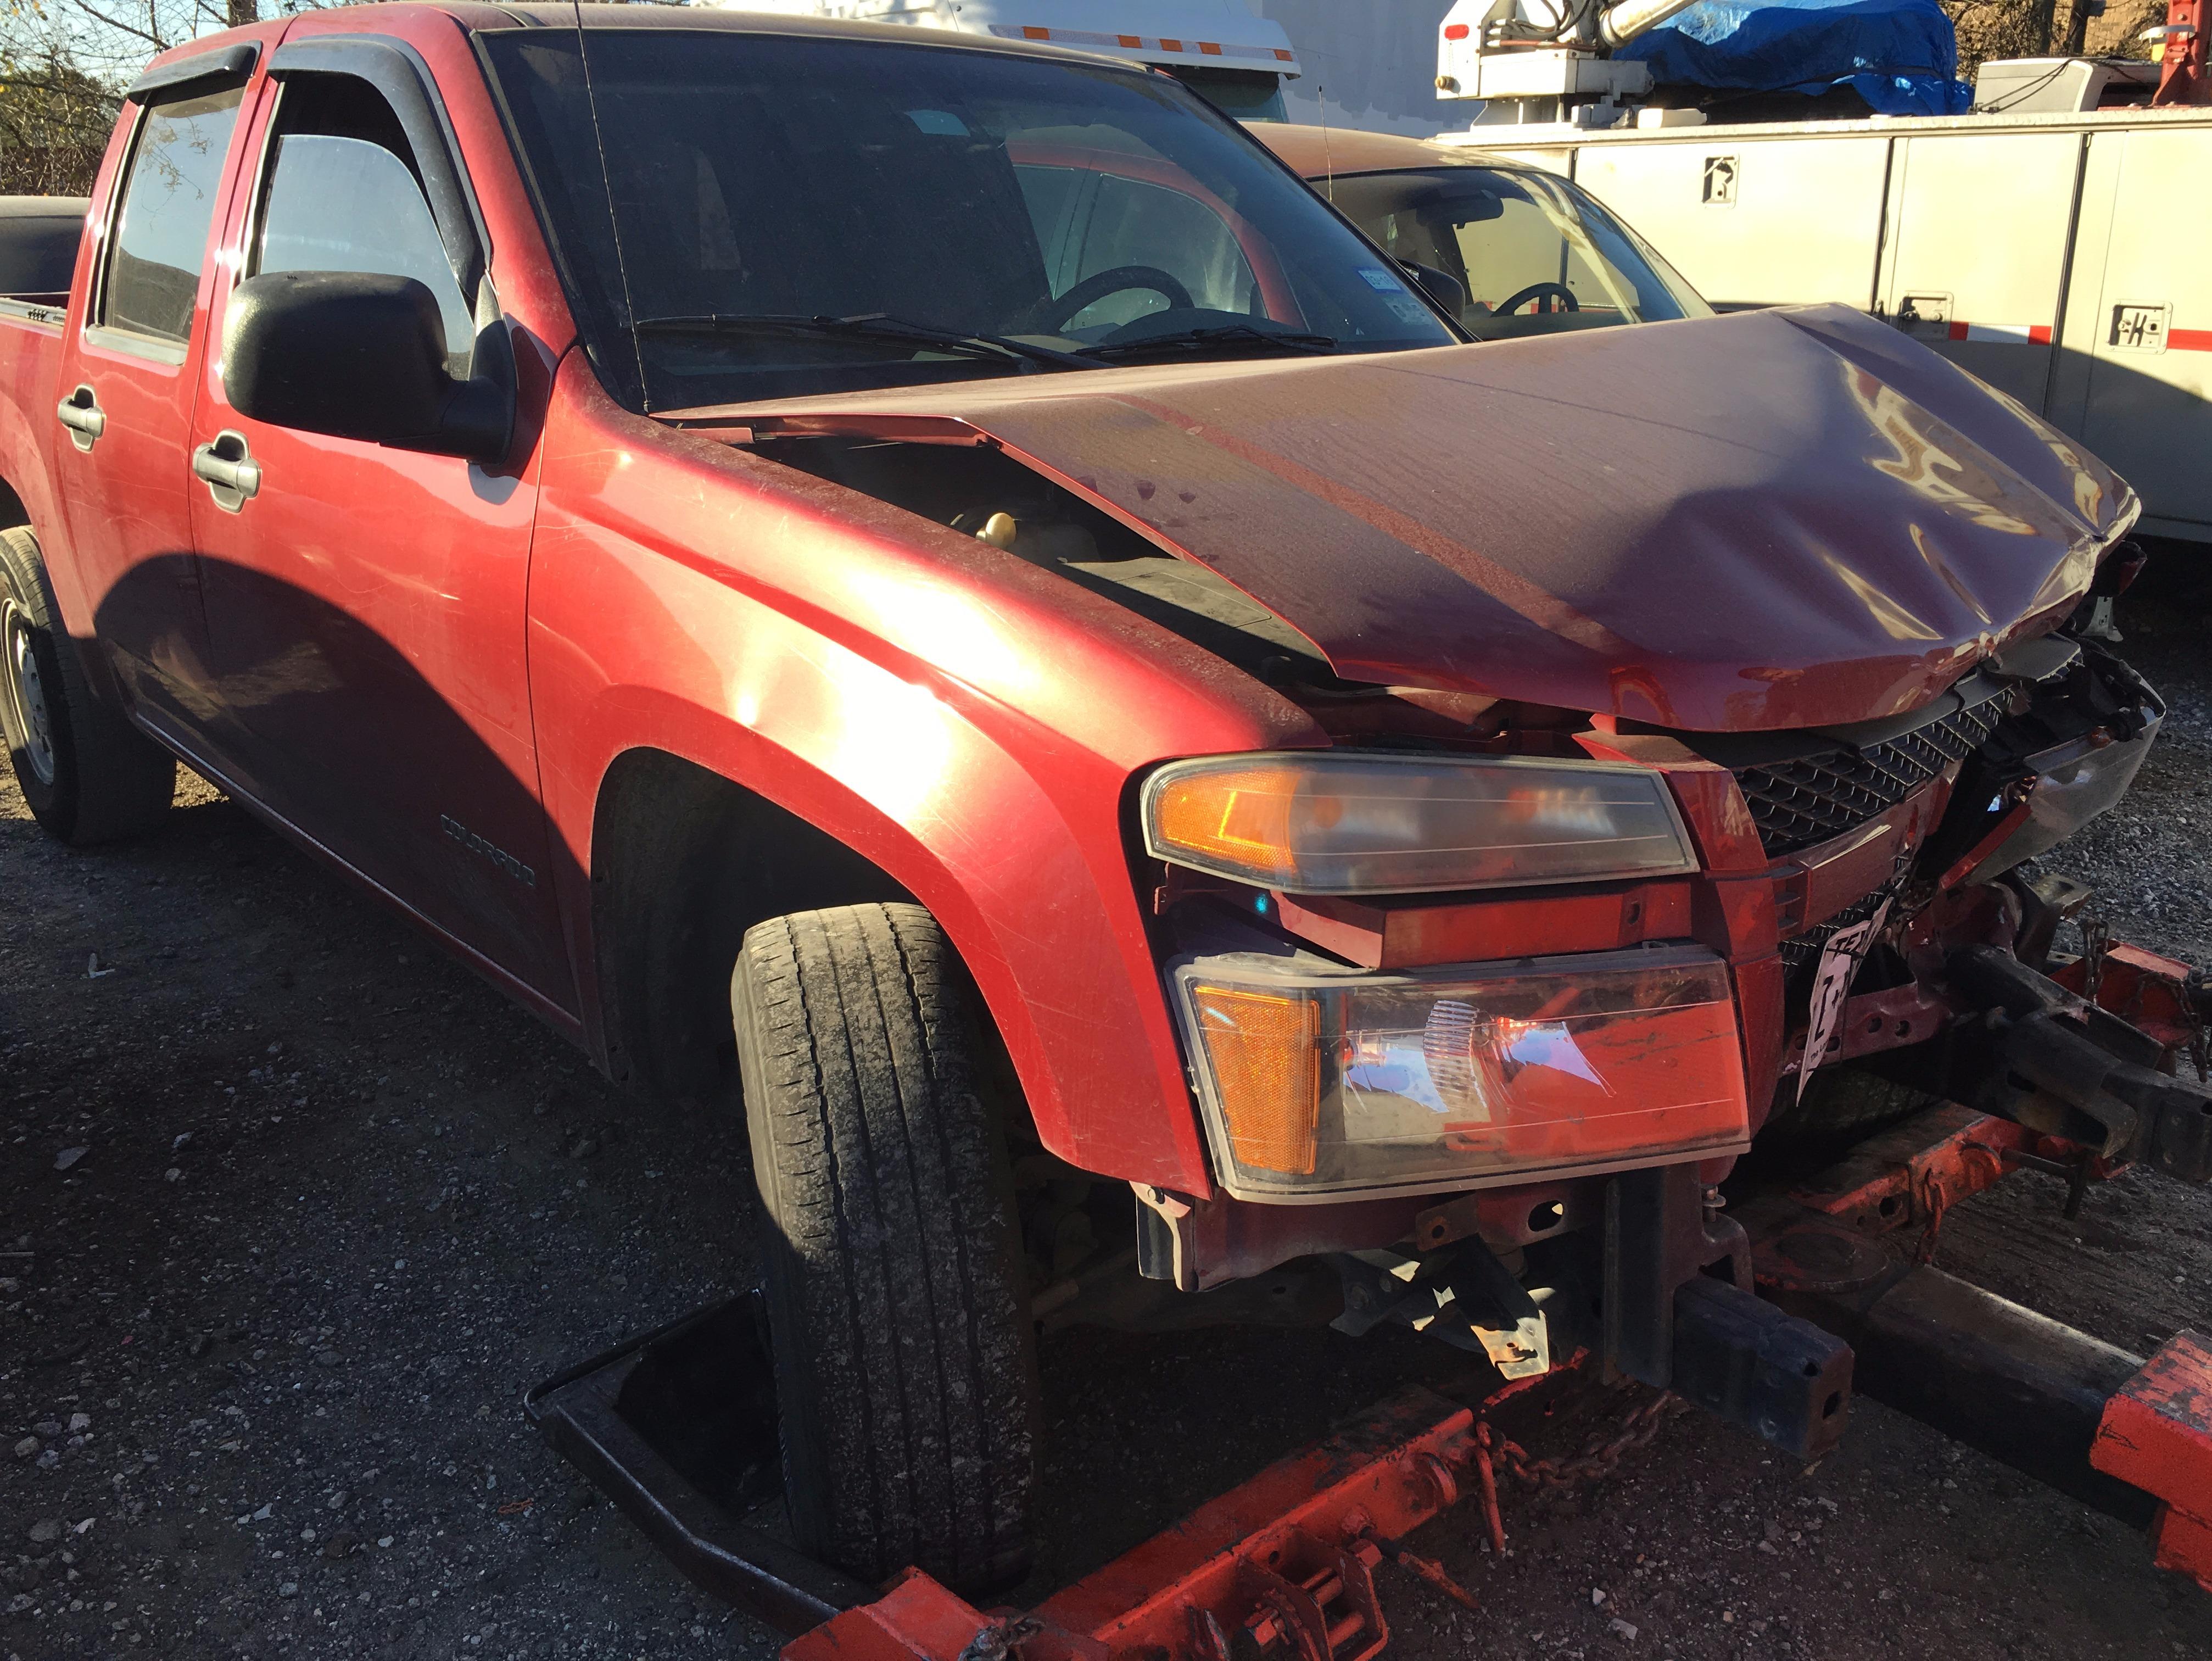 Do you a wrecked truck? Please call us to get an instant cash offer. Get paid cash on the spot plus free towing.